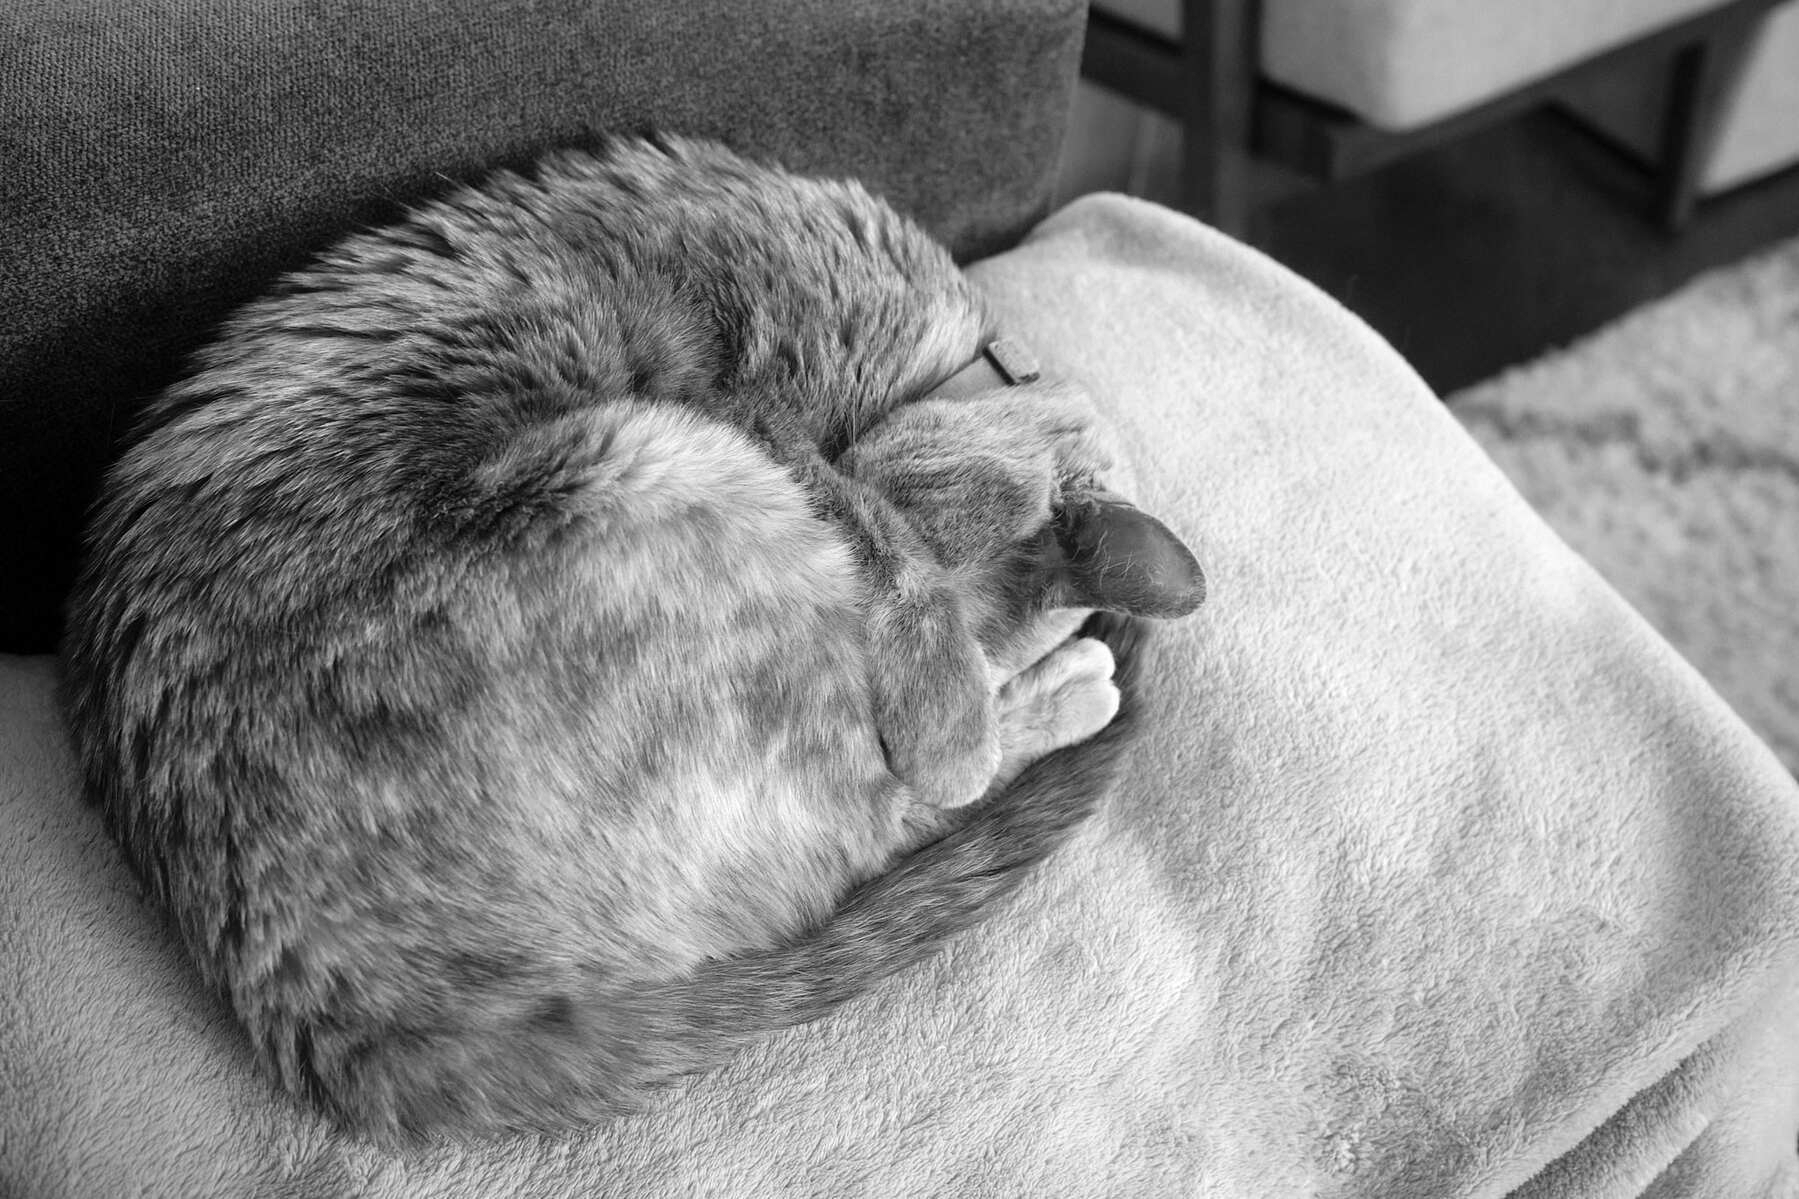 a black and white picture of a cat curled into a ball, with her eyes covered by a paw, napping.